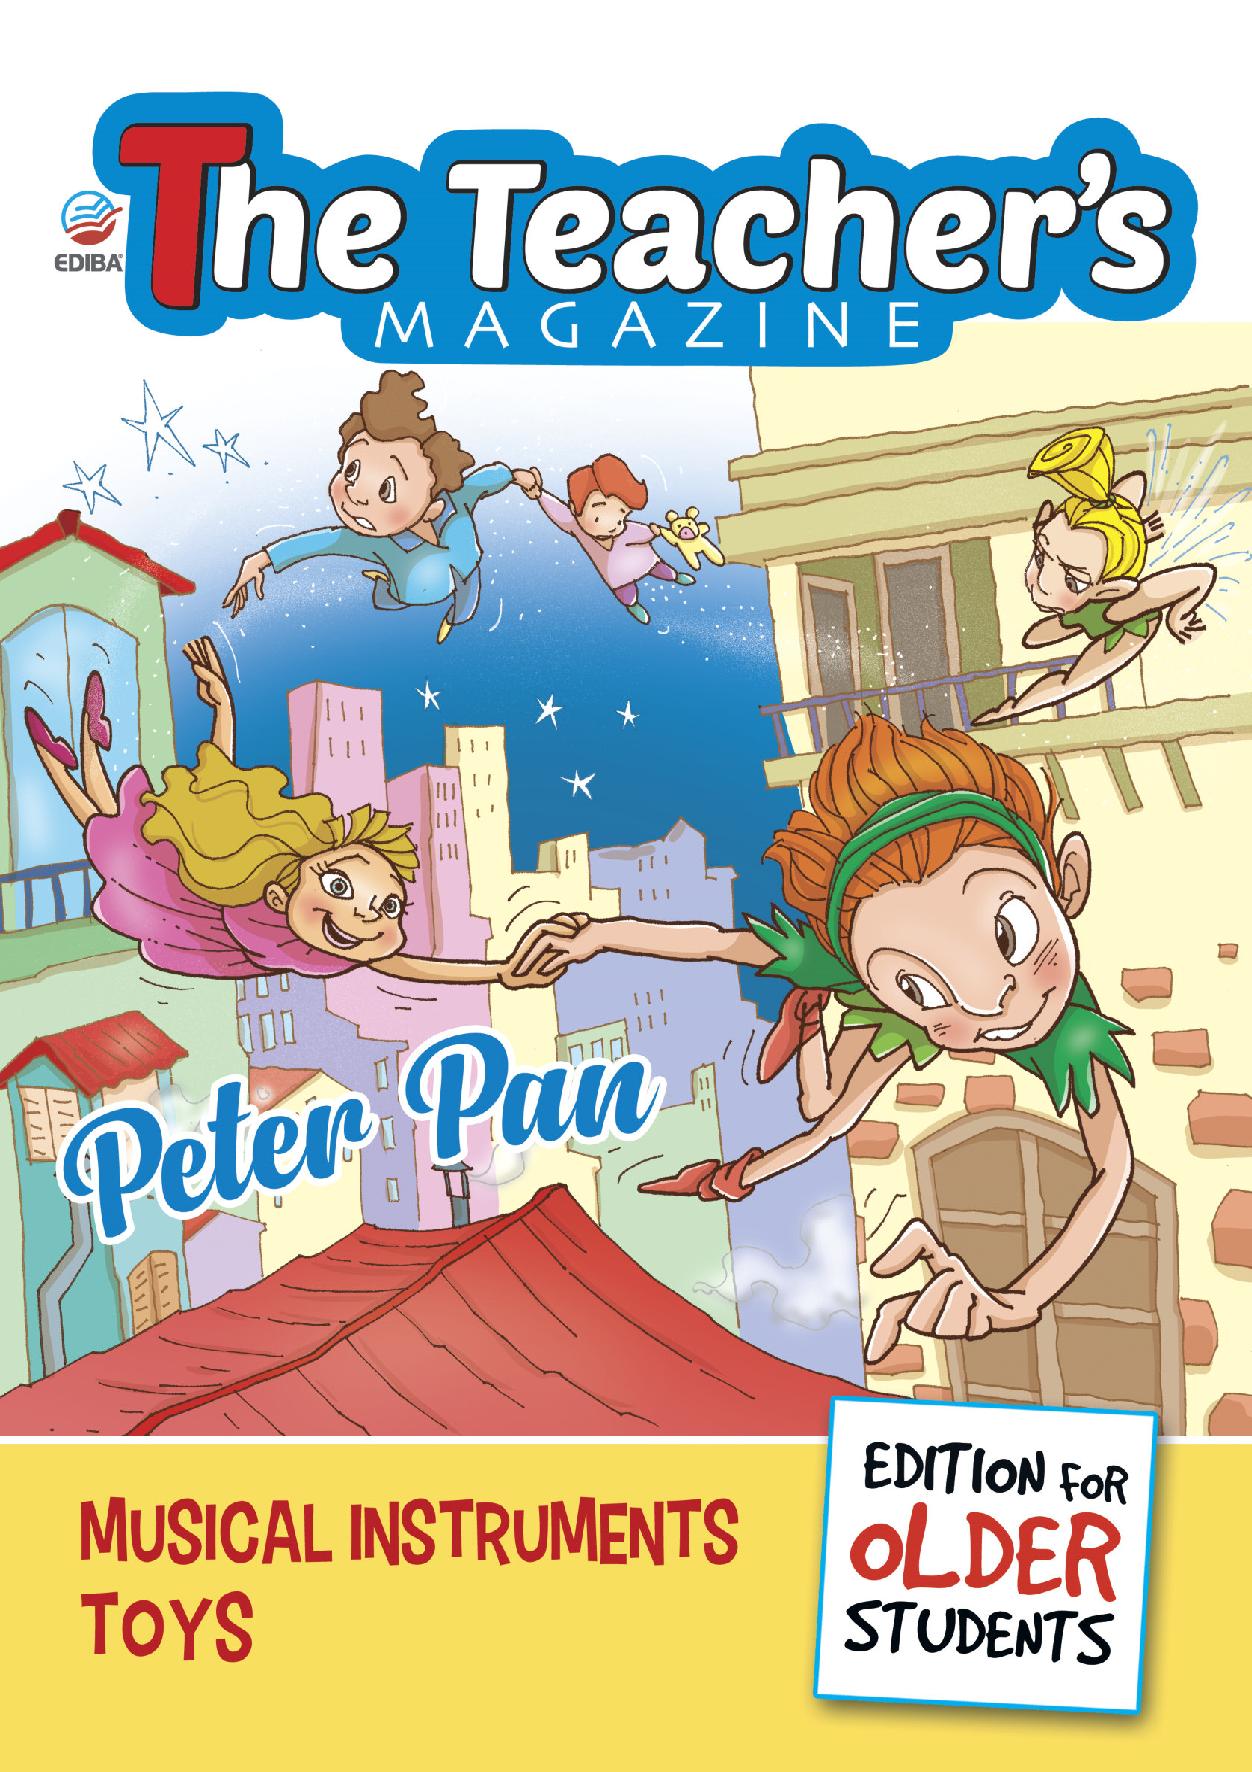 The Teacher's Magazine - Editions for Older Students